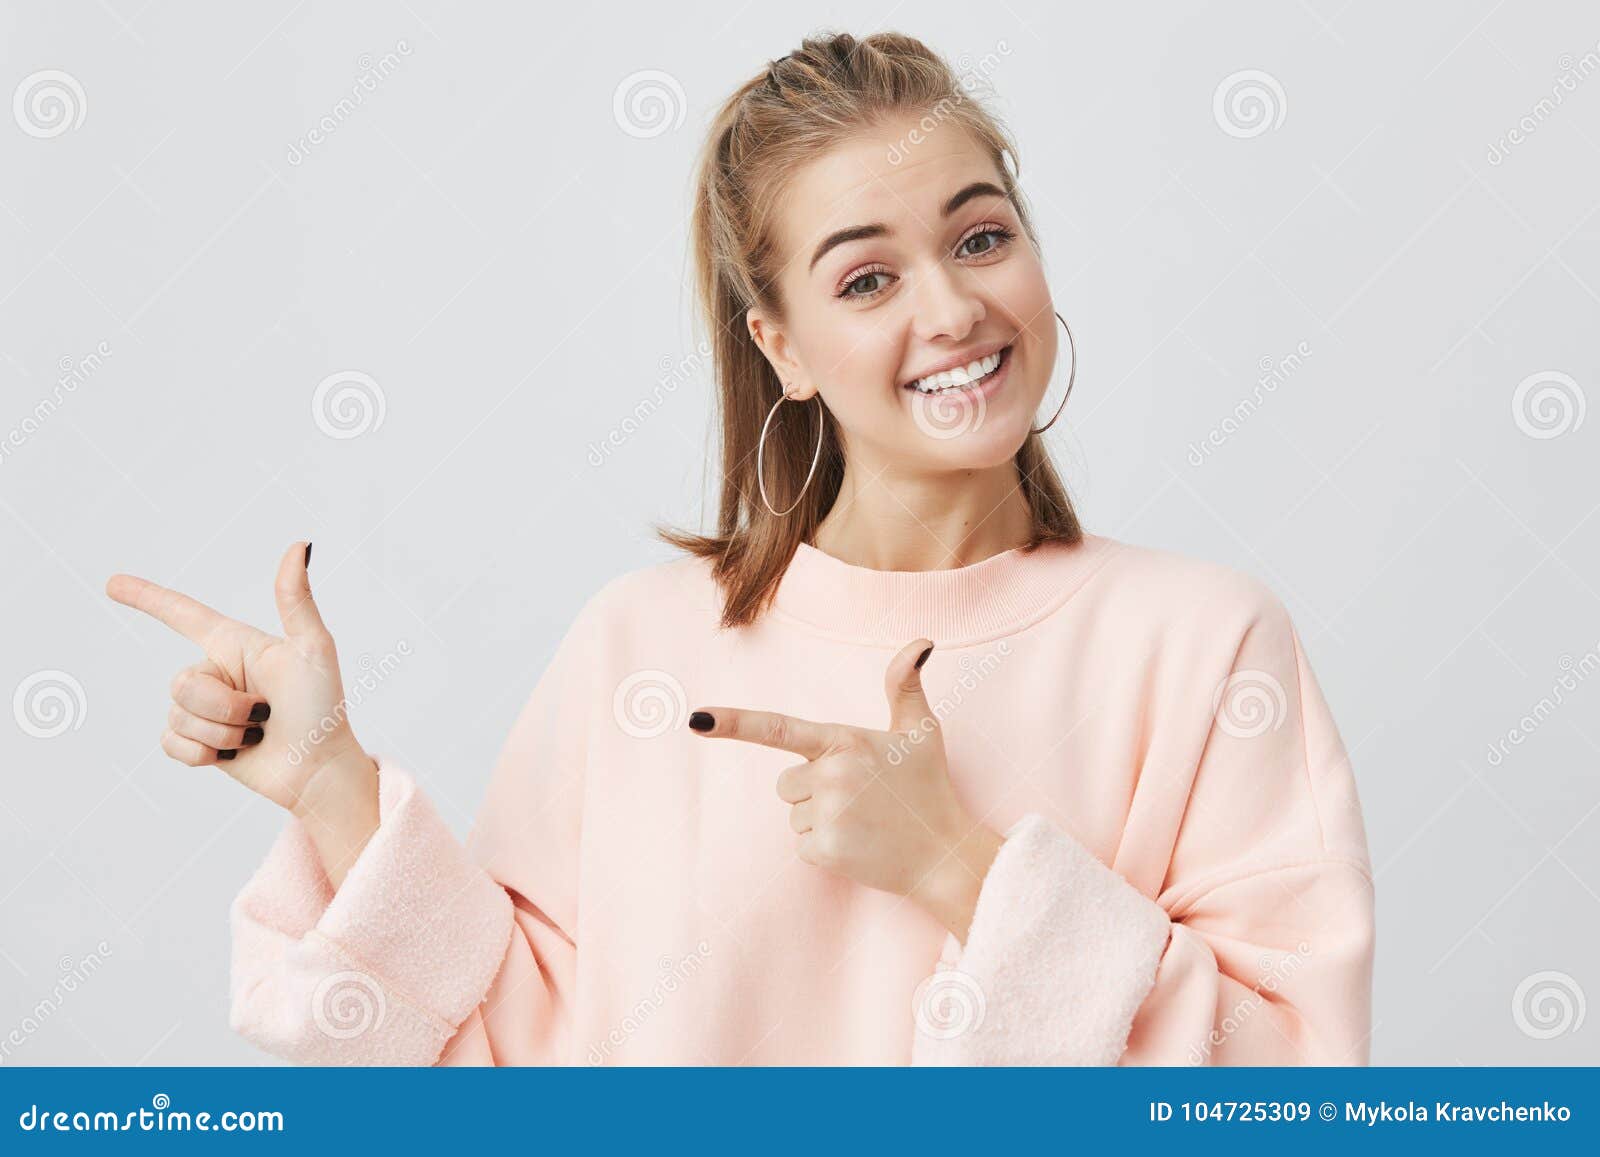 smiling fair-haired young woman in pink sweatshirt pointing at copy space for your advertisment or text. positive girl